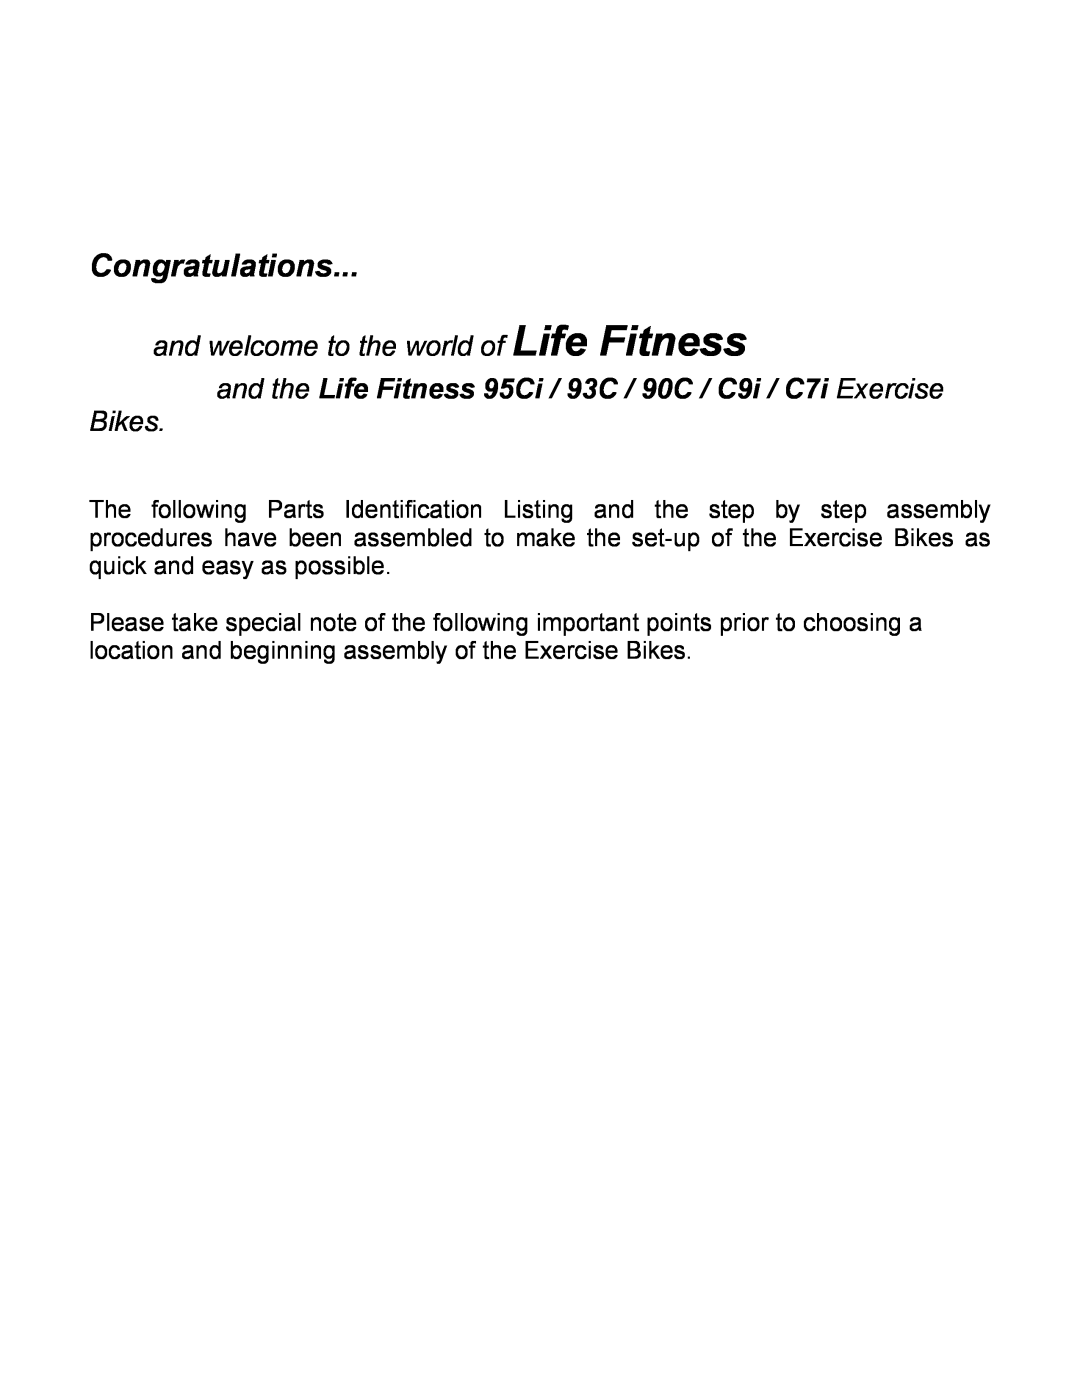 Life Fitness C9I, C7i manual Congratulations, and welcome to the world of Life Fitness, Bikes 